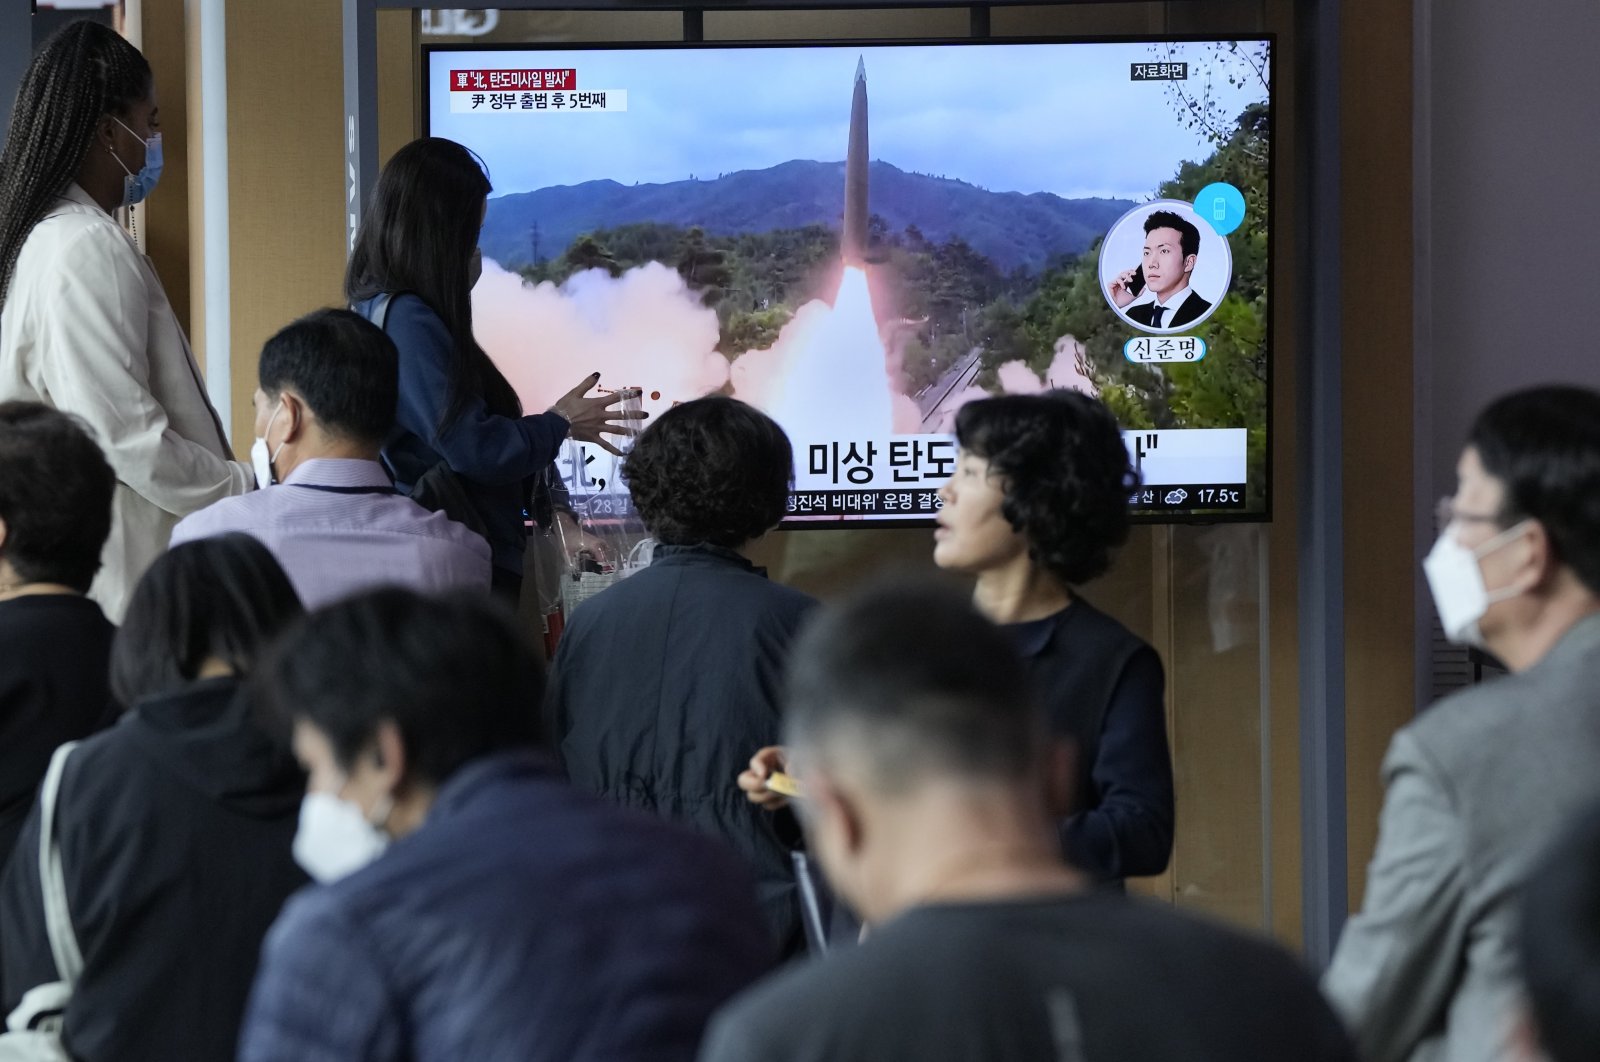 People watch a news program showing a file image of a missile launch by North Korea at the Seoul Railway Station in Seoul, South Korea, Sept. 25, 2022. (AP Photo)